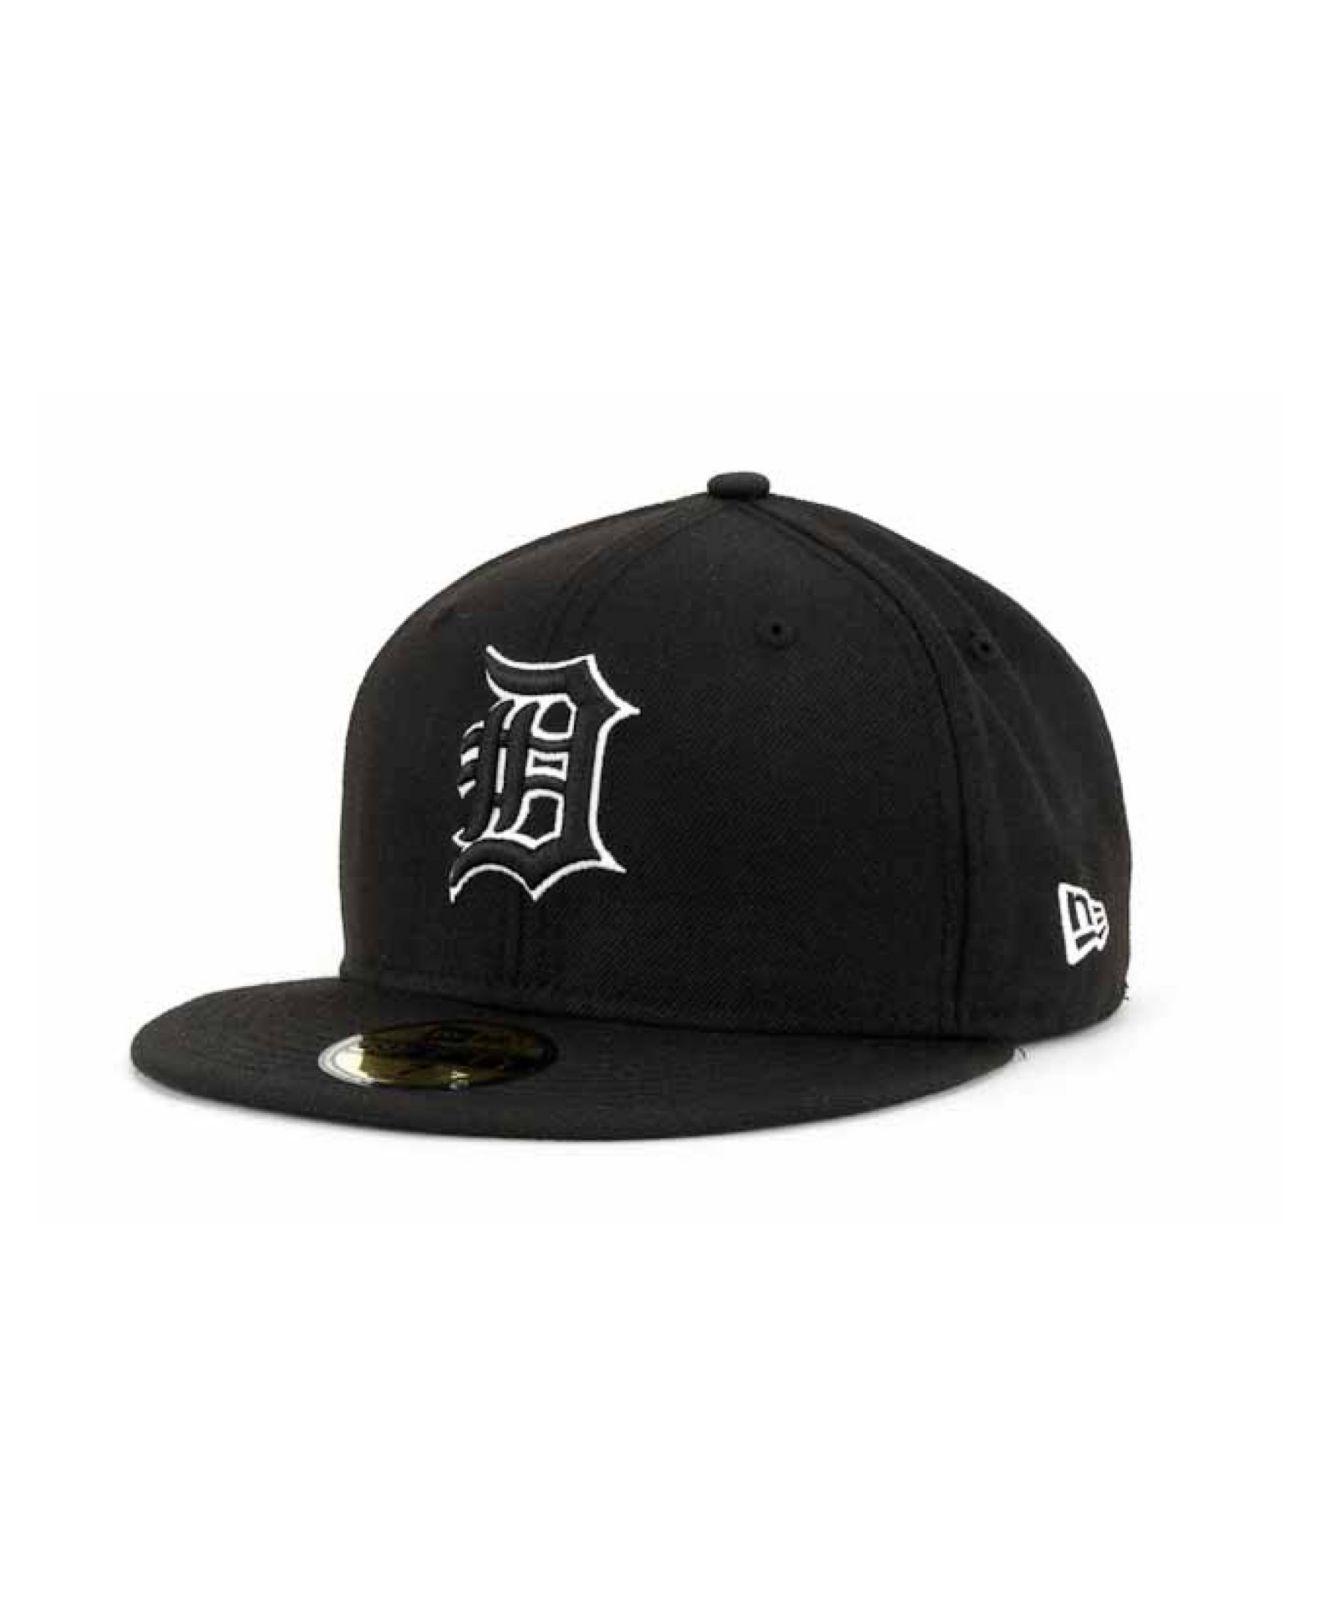 KTZ Detroit Tigers White Out 59fifty Fitted Cap for Men